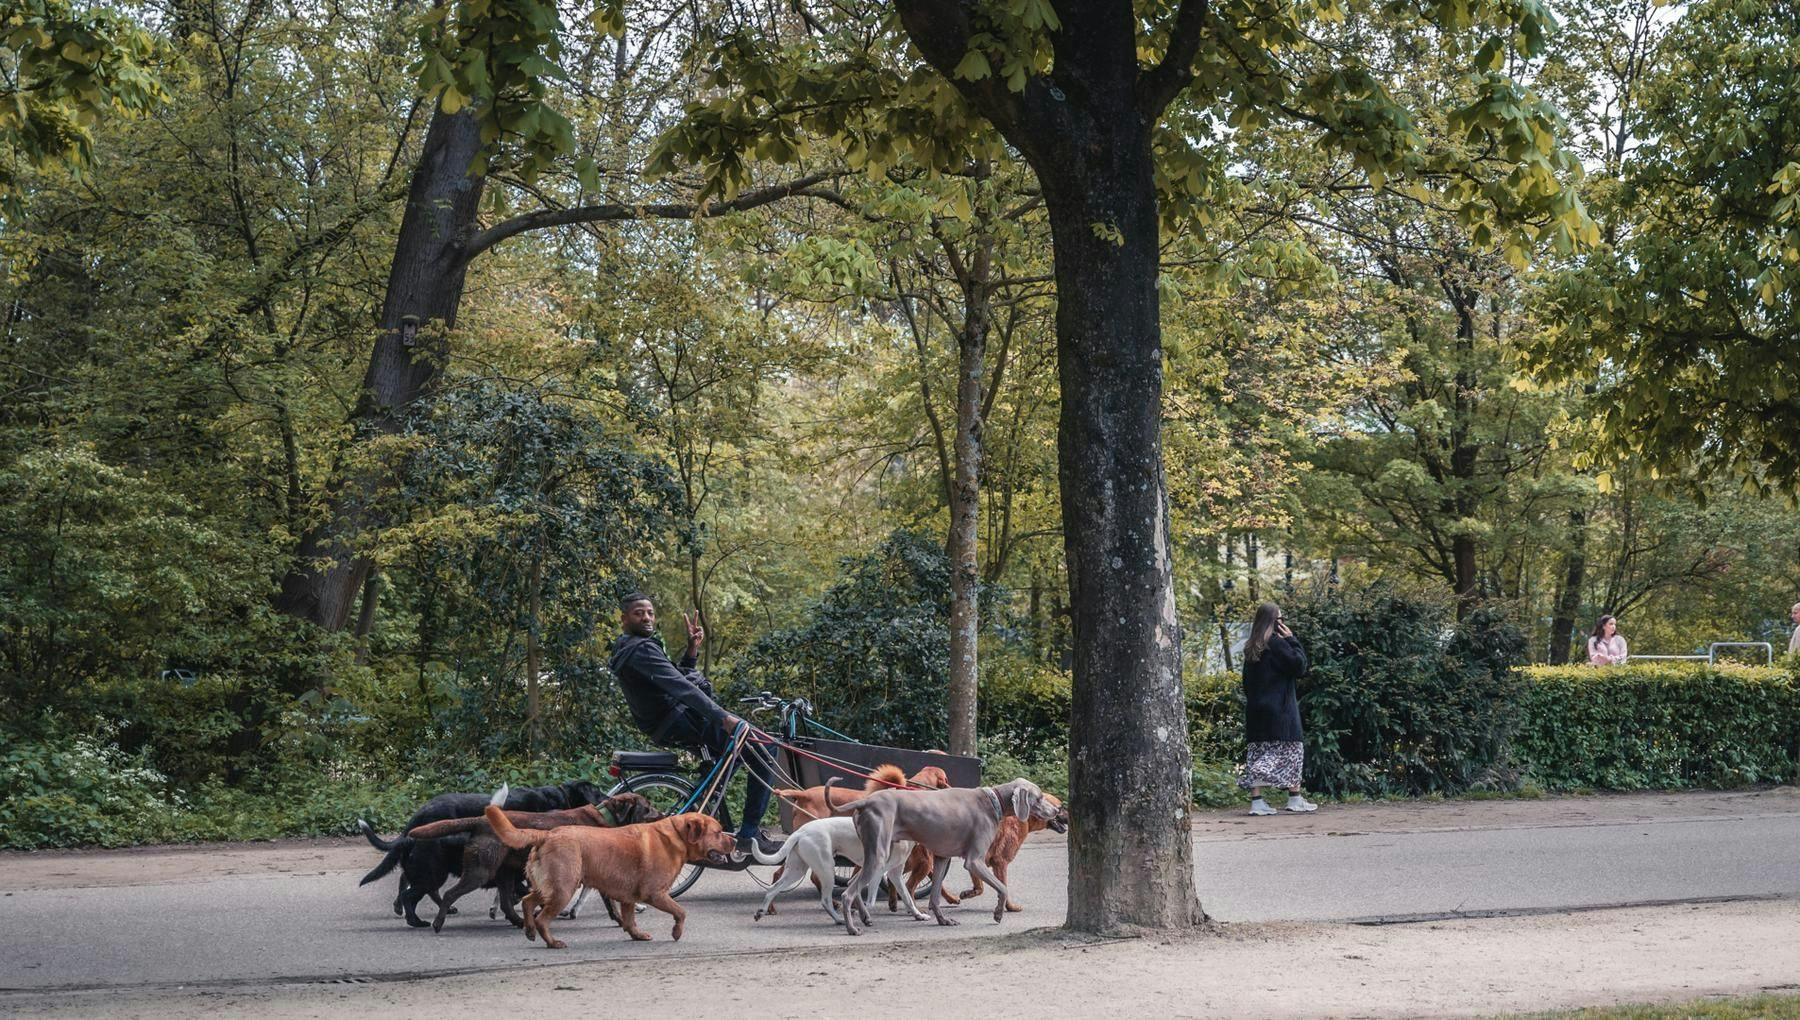 A lot of dogs in the Vondelpark